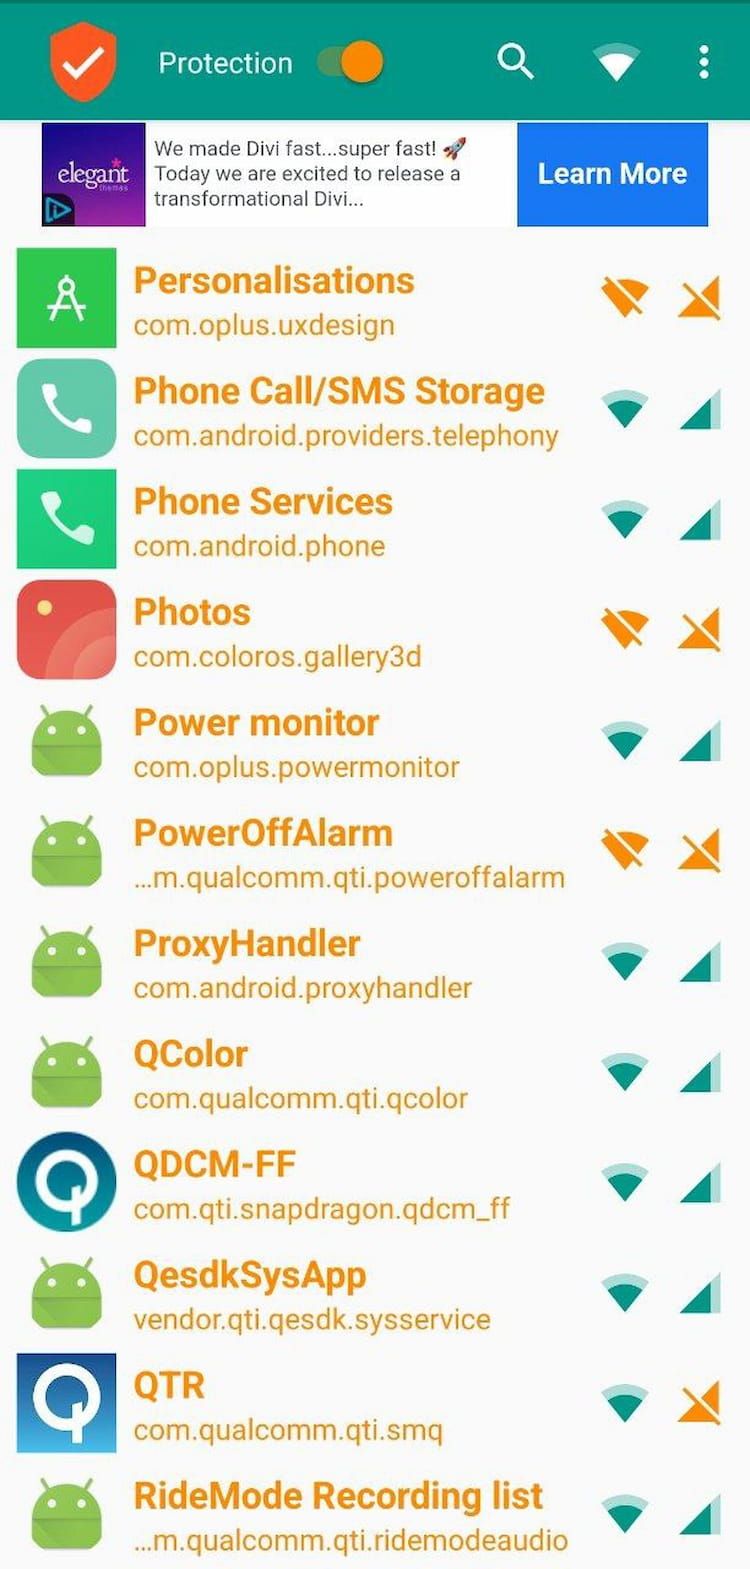 NetProtector Android App Rules